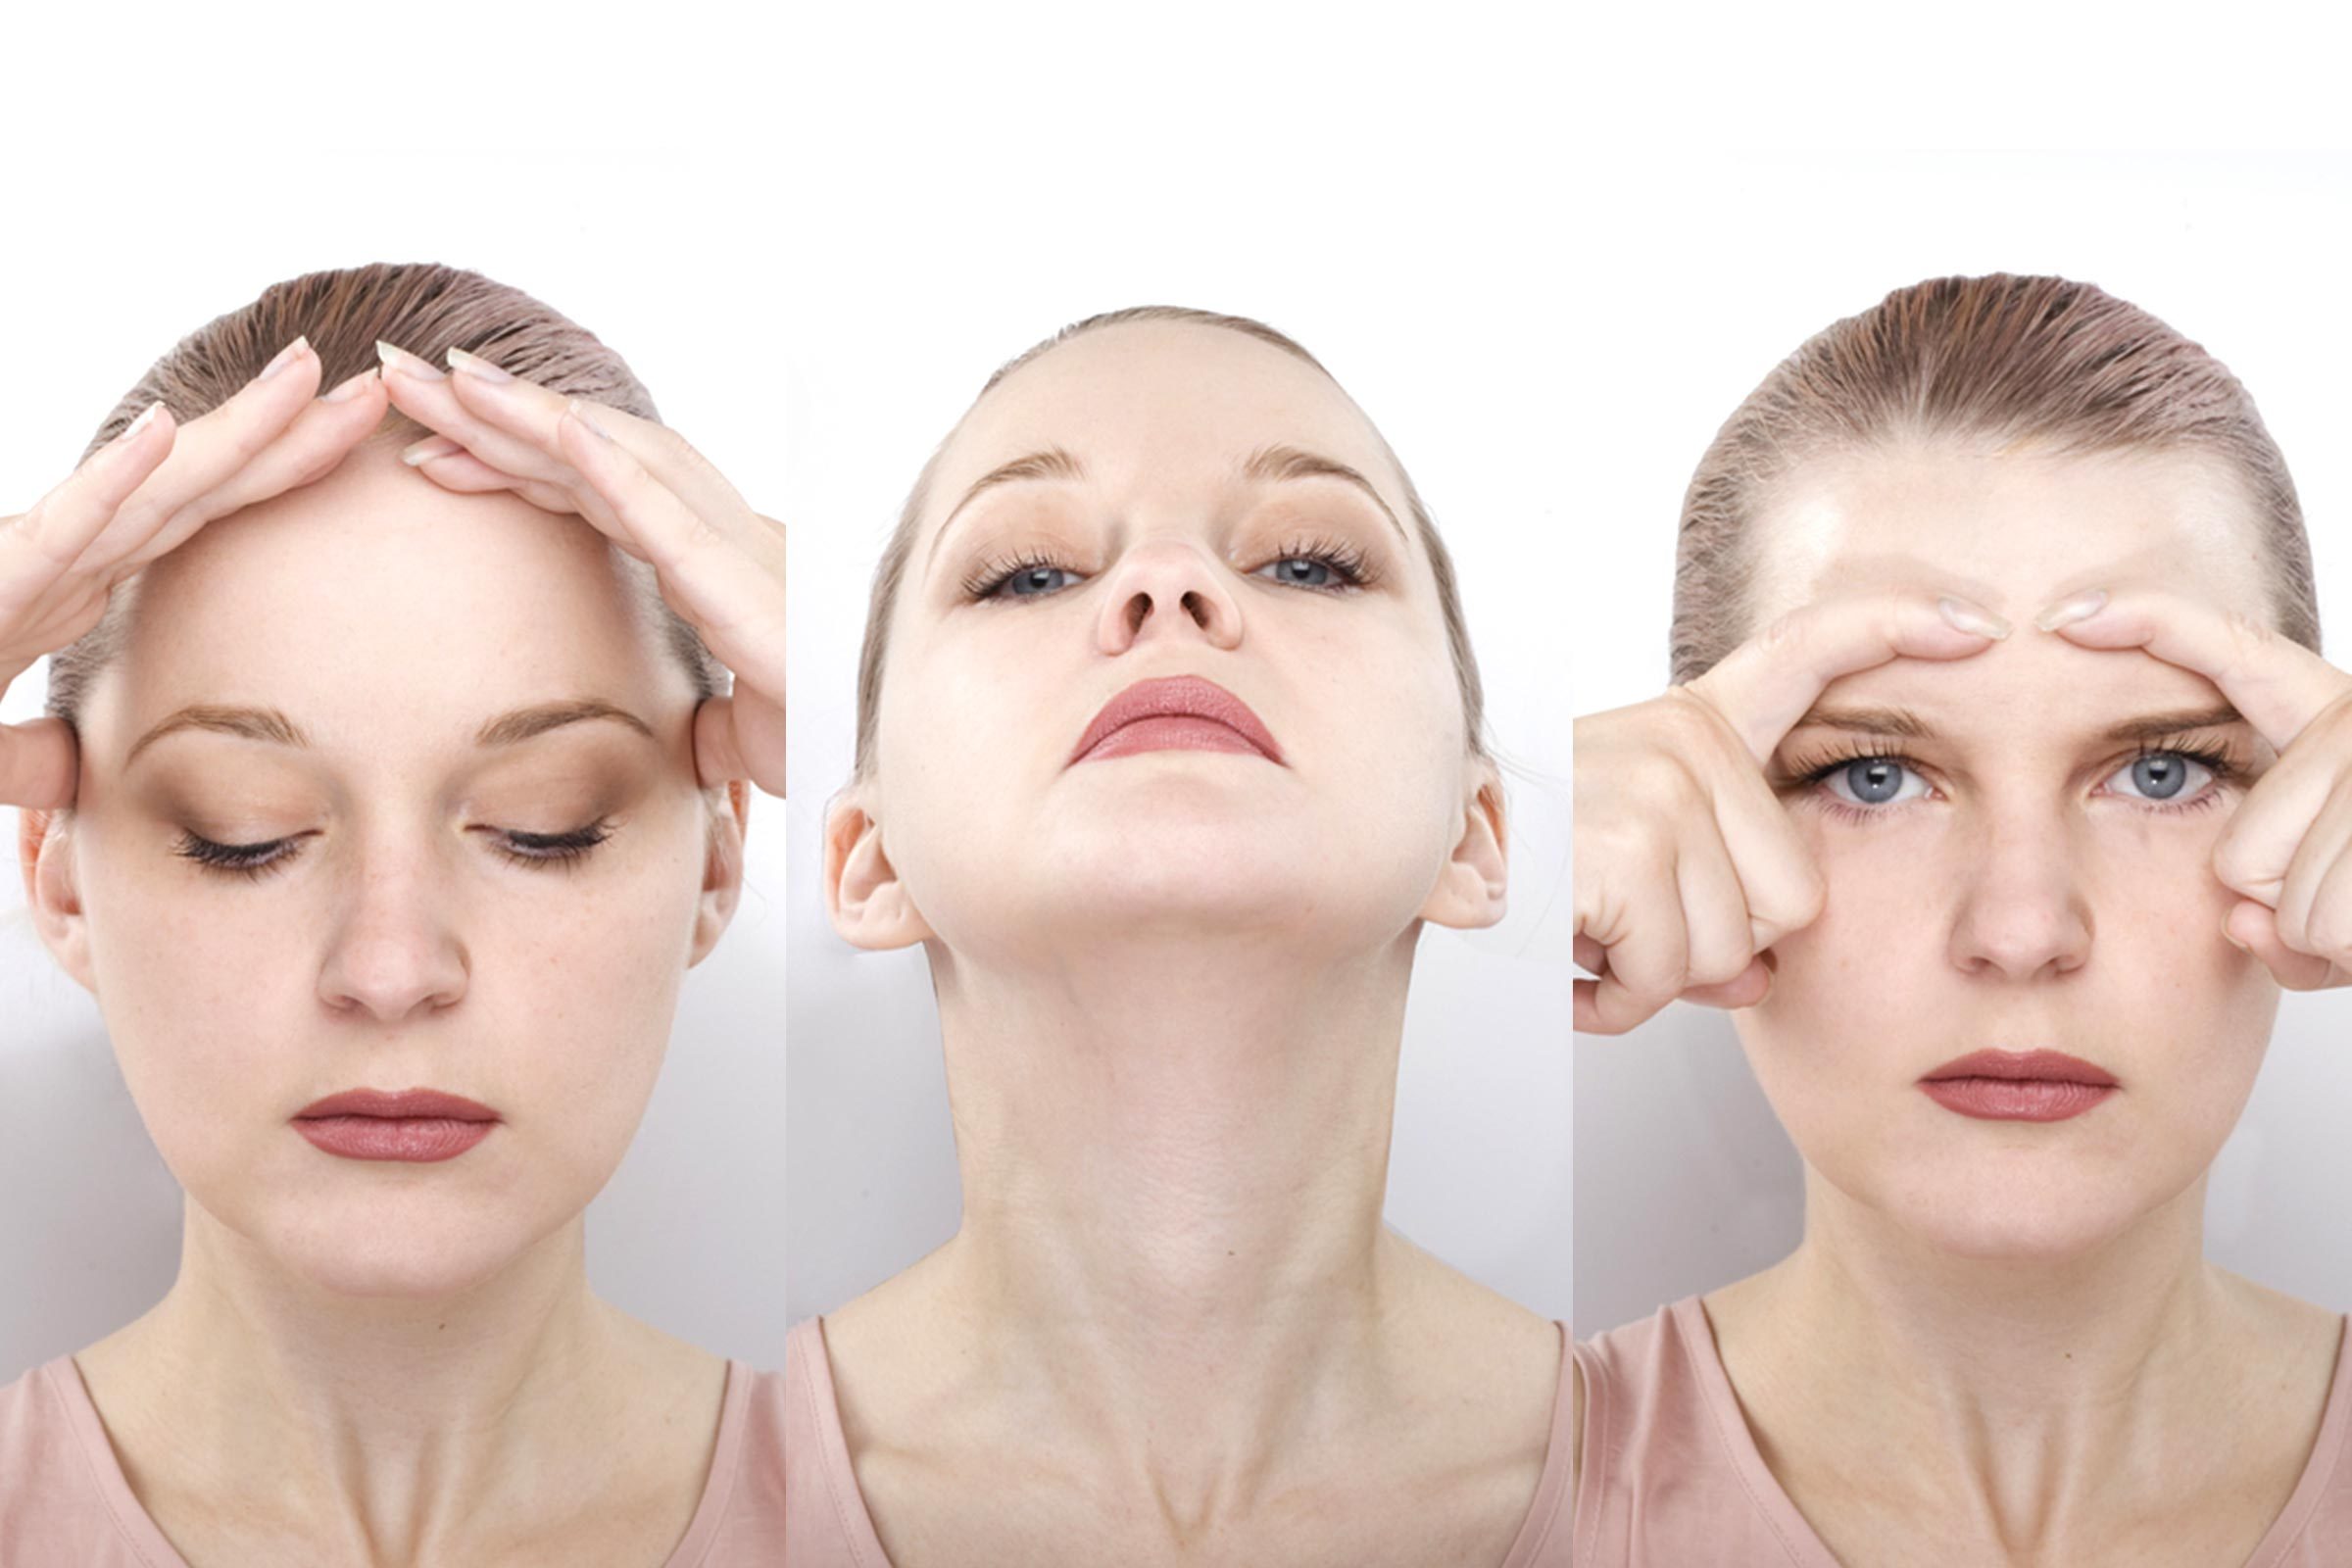 This Is What Your Doctor REALLY Thinks of Those Trending Facial Exercises